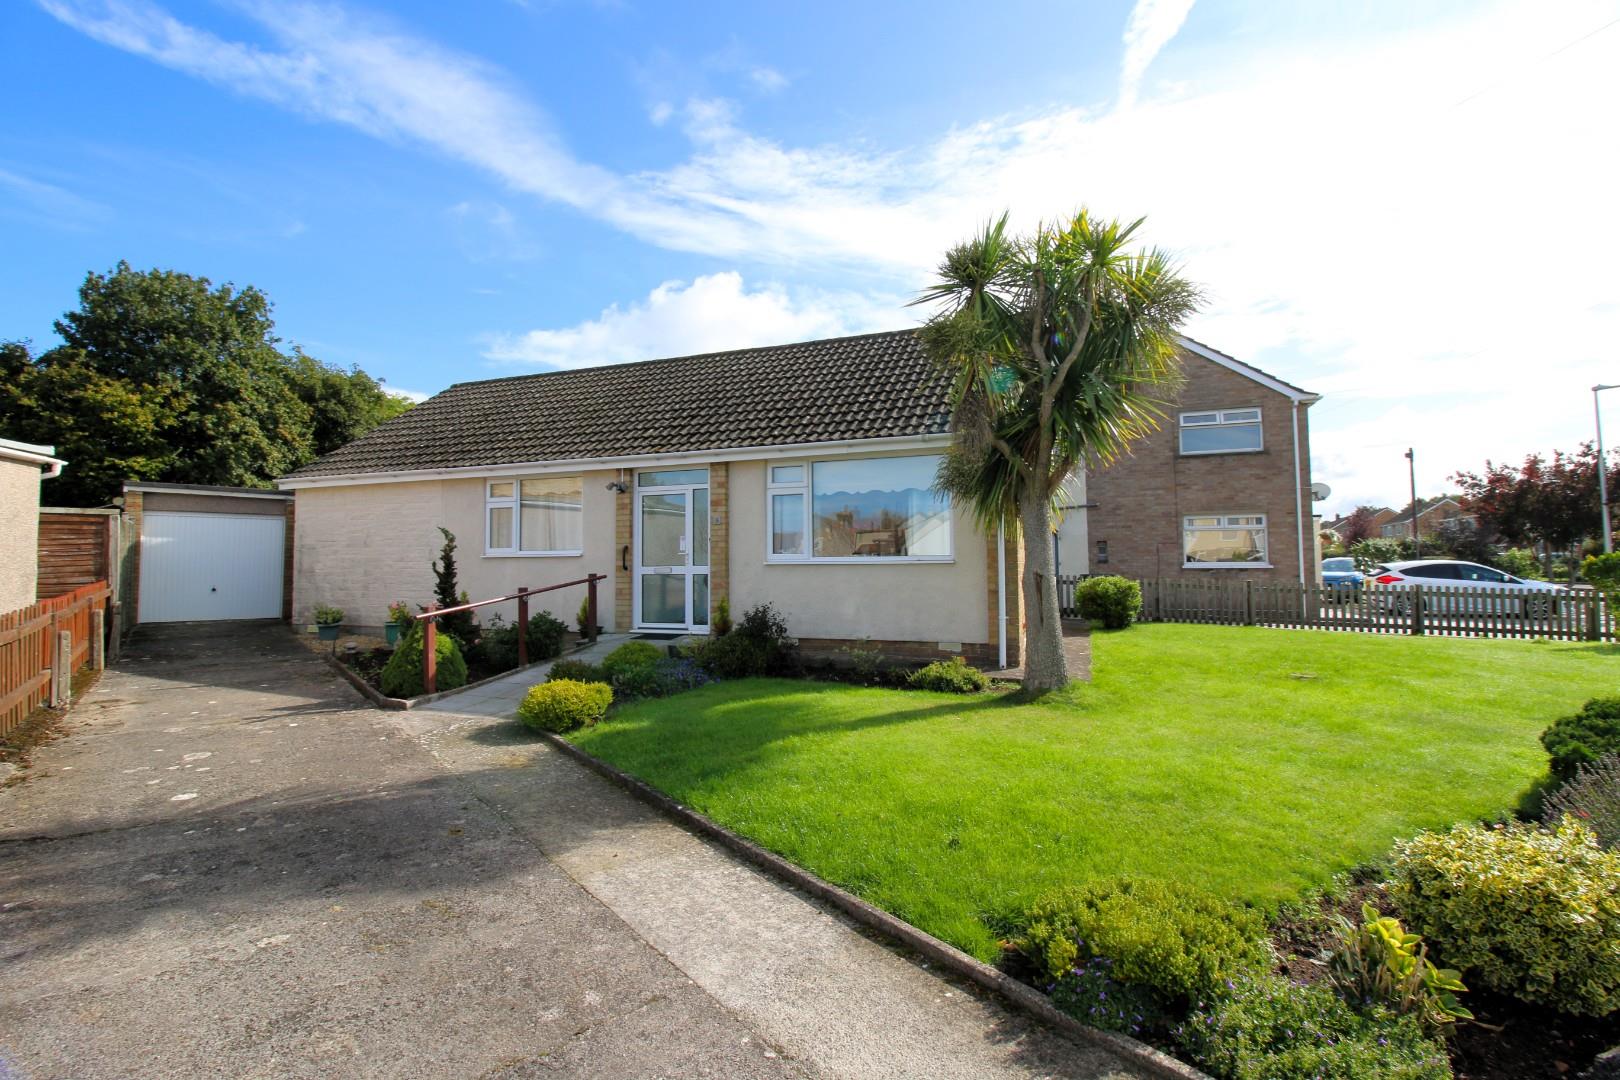 Beautifully presented, detached bungalow in central Yatton